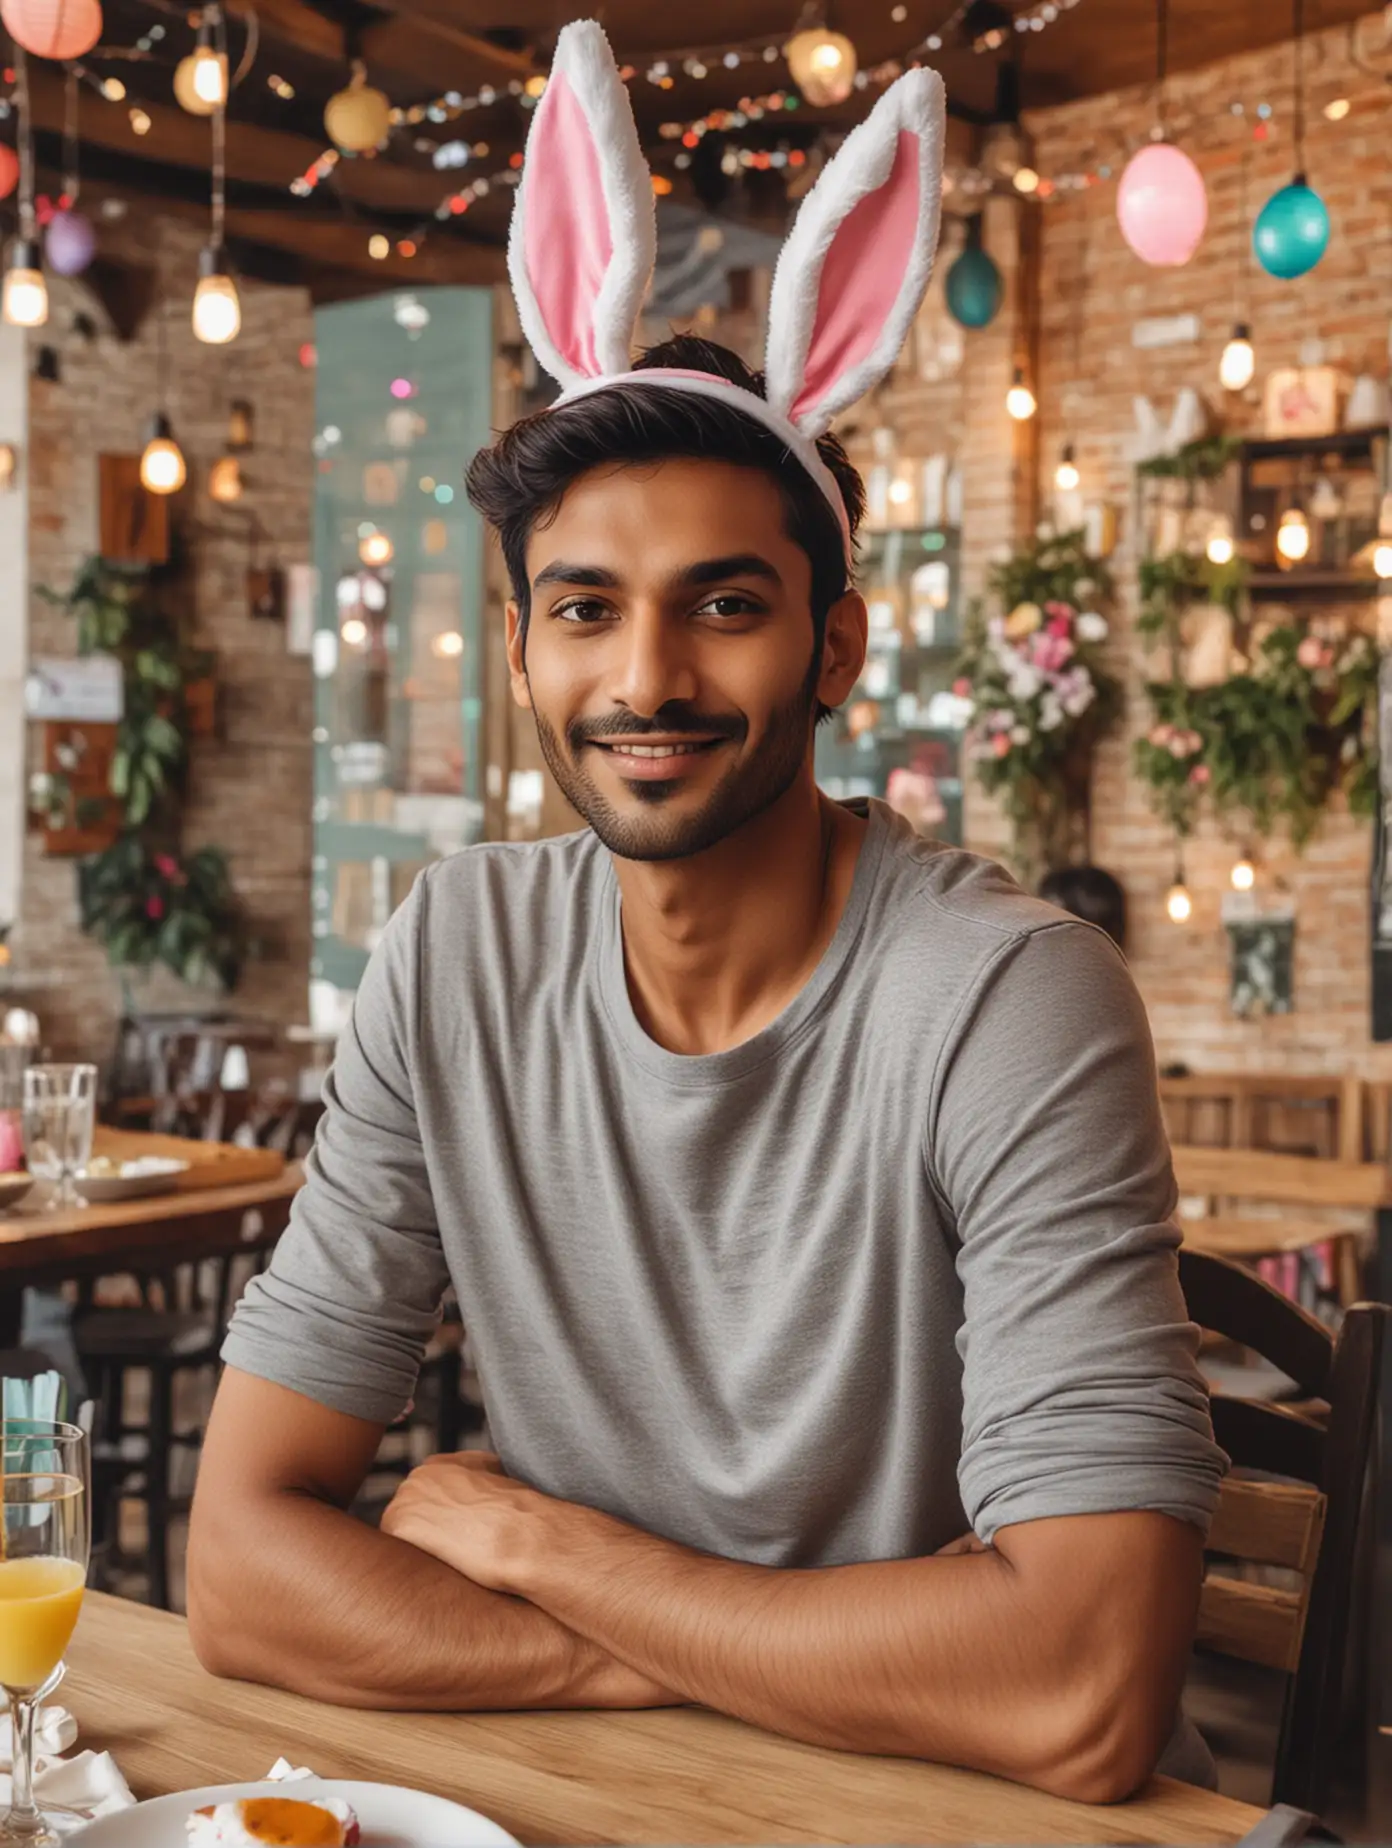 In the photo, a sexy Indian handsome man is wearing bunny ears and sitting in a restaurant during the Easter holidays. He was dressed in casual clothes and looked happy. There are Easter decorations everywhere and it’s a cozy atmosphere